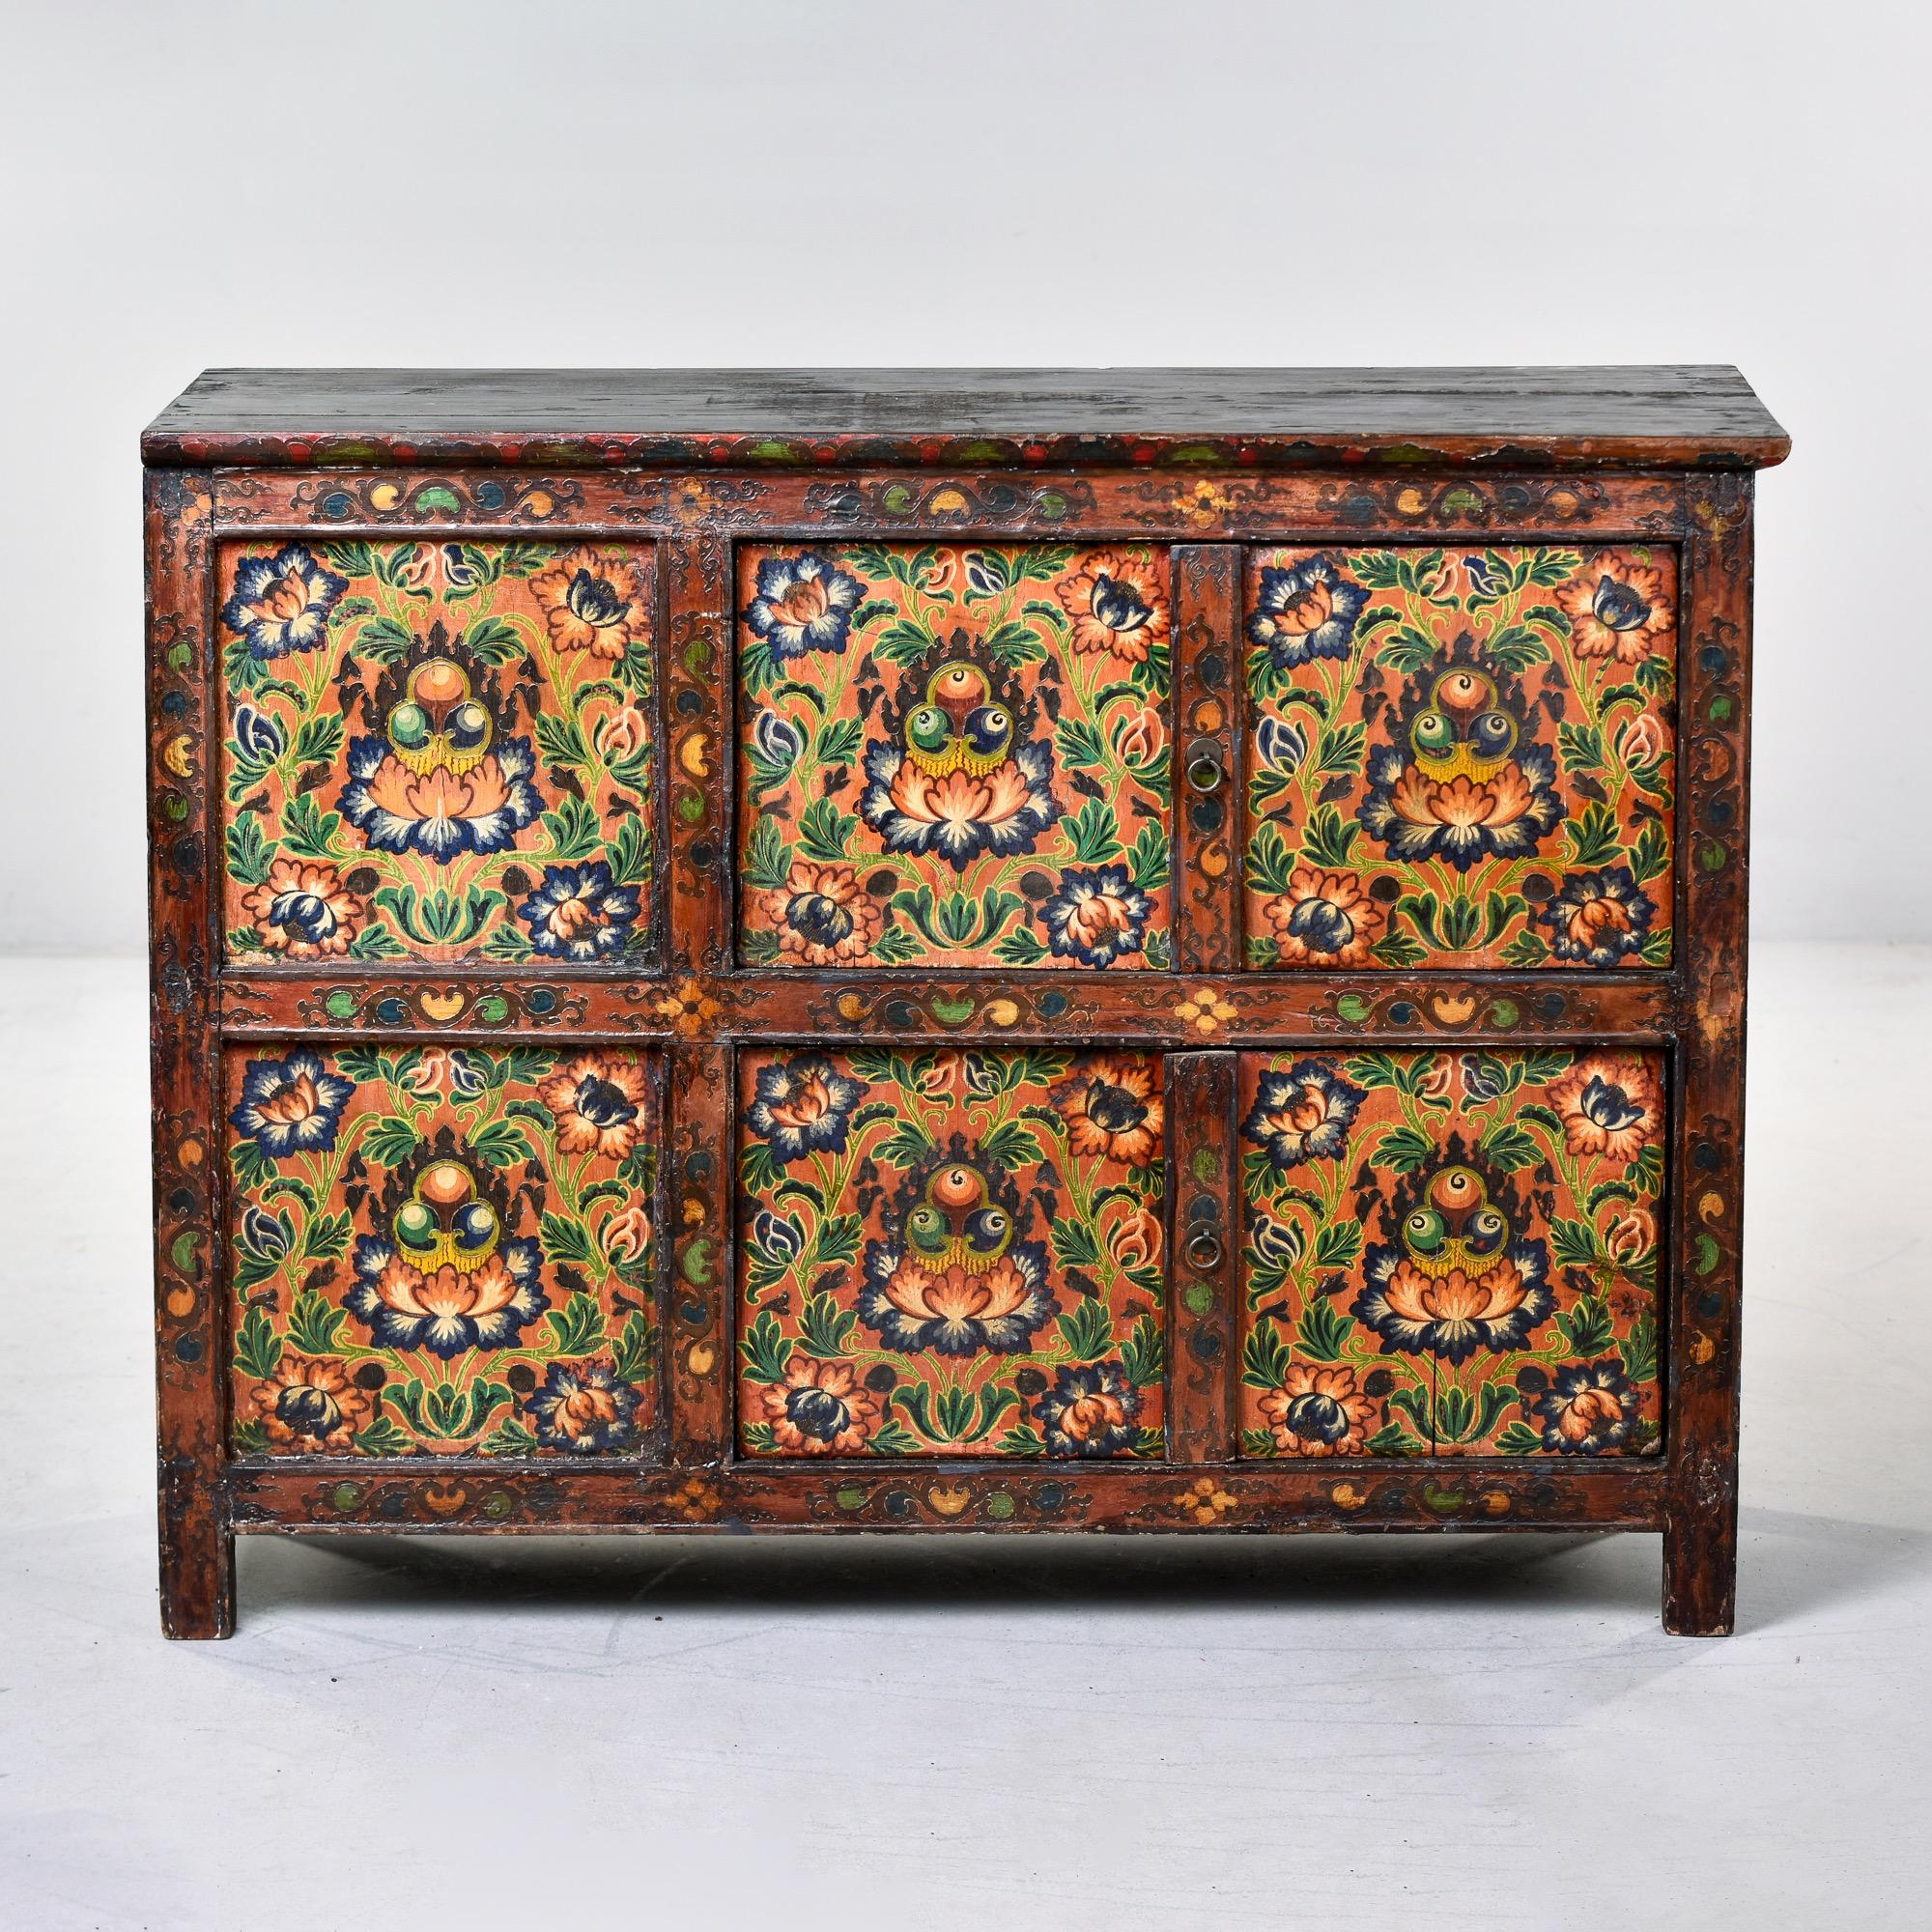 Circa 1910 Tibetan cabinet with vibrant hand painted finish depicting elaborate lotus blossom design across six panels on the front. Dominant color hues are blue, golds, greens, cream and a dusky persimmon. Cabinet opens at the front on two levels